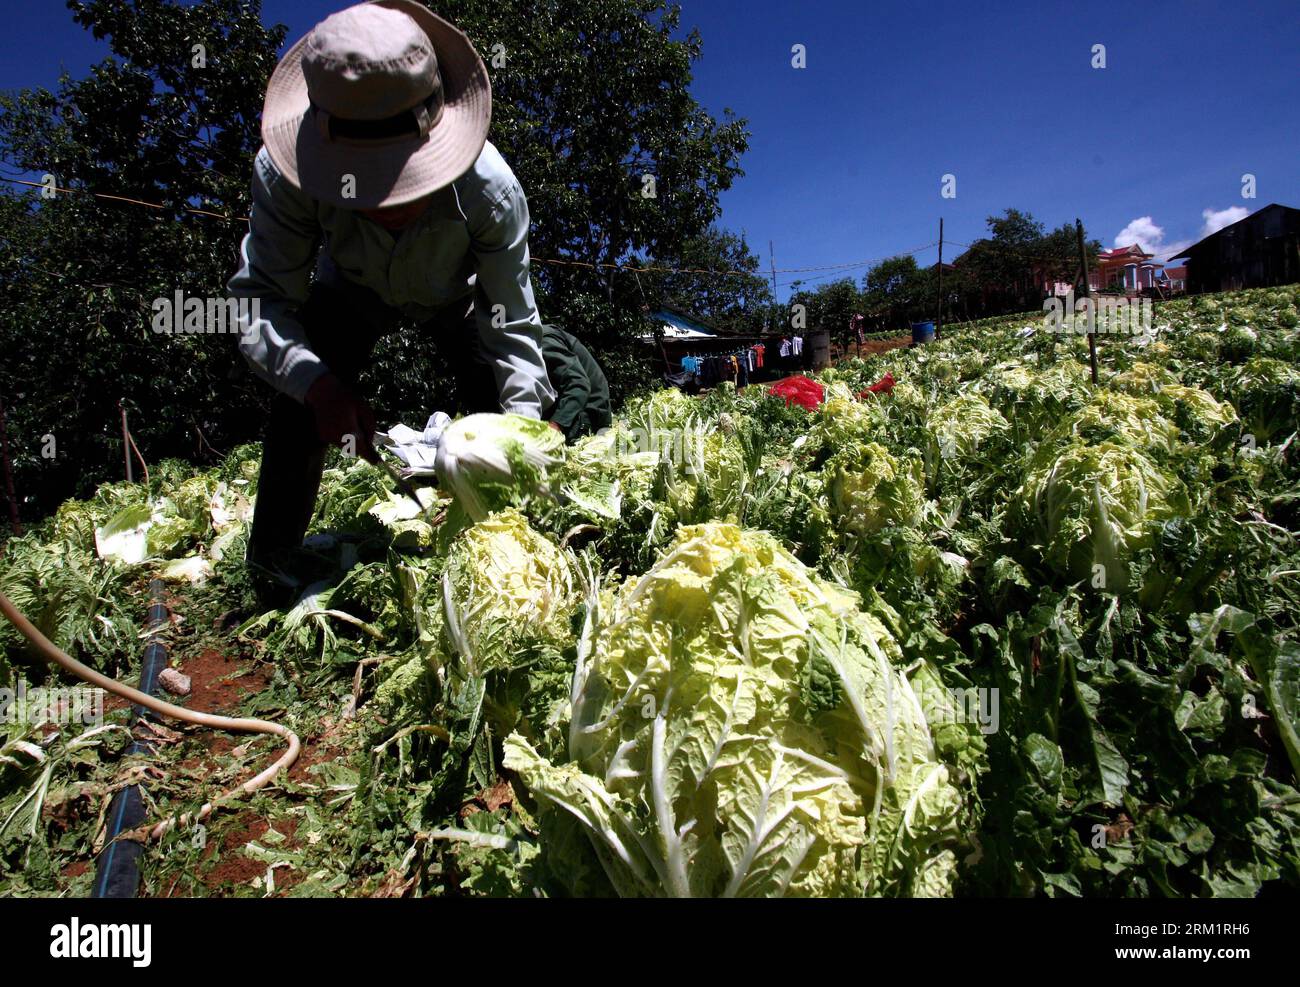 Bildnummer: 59620689  Datum: 09.05.2013  Copyright: imago/Xinhua (130509) -- HANOI, May 9, 2013 (Xinhua) -- A local resident harvests vegetable destroyed by a hailstorm in Da Lat City, Lam Dong Province, central Vietnam, May 9, 2013. Hailstorm and whirlwinds hitting northern and central Vietnam in the last two days caused severe property damages. (Xinhua/VNA) VIETNAM-LAM DONG-HAILSTORM PUBLICATIONxNOTxINxCHN xcb x0x 2013 quer      59620689 Date 09 05 2013 Copyright Imago XINHUA  Hanoi May 9 2013 XINHUA a Local Resident Harvests Vegetable destroyed by a hailstorm in there LAT City LAM Dong Prov Stock Photo